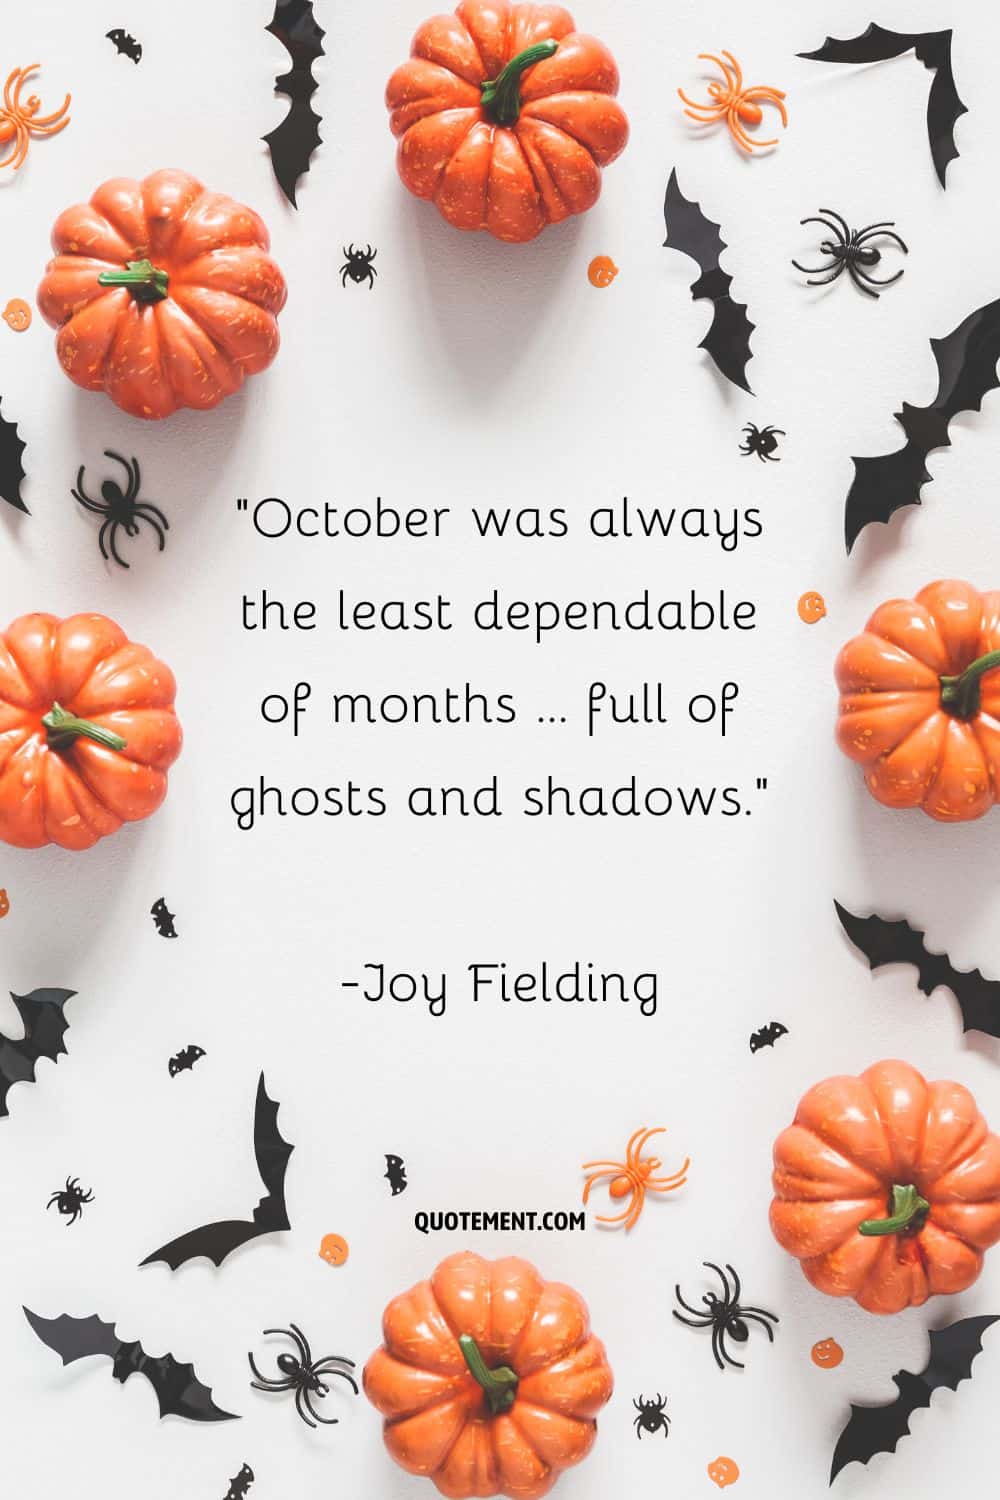 October was always the least dependable of months … full of ghosts and shadows